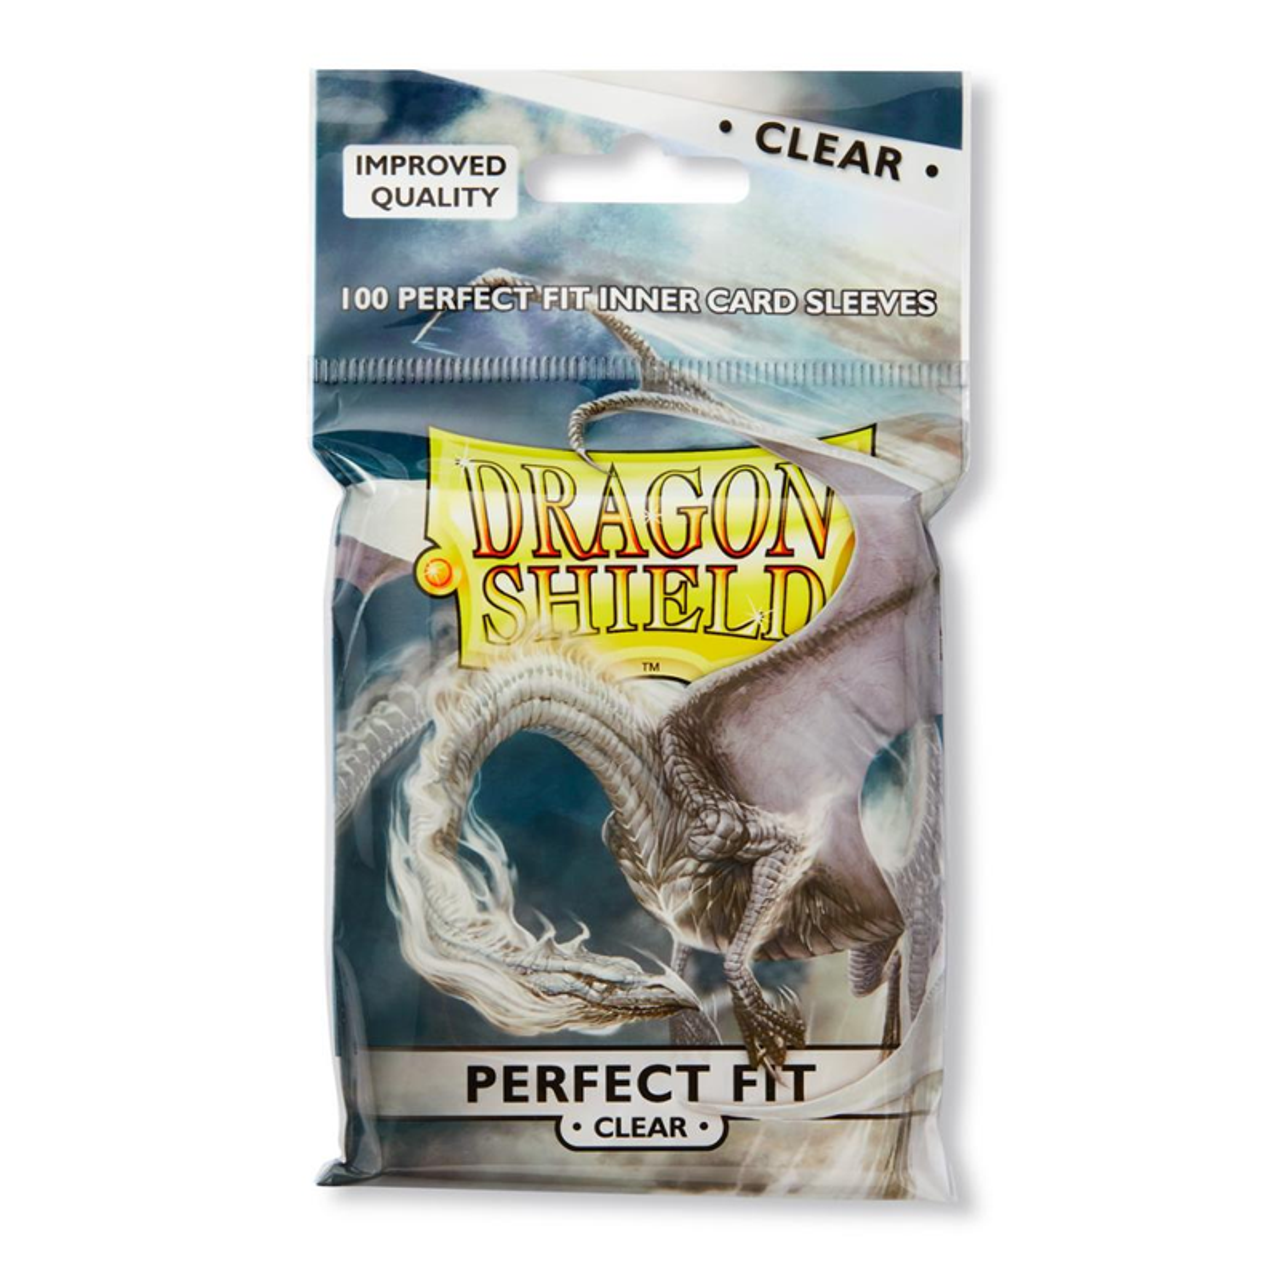 DRAGON SHIELD - PERFECT FIT RESEALABLE SLEEVE